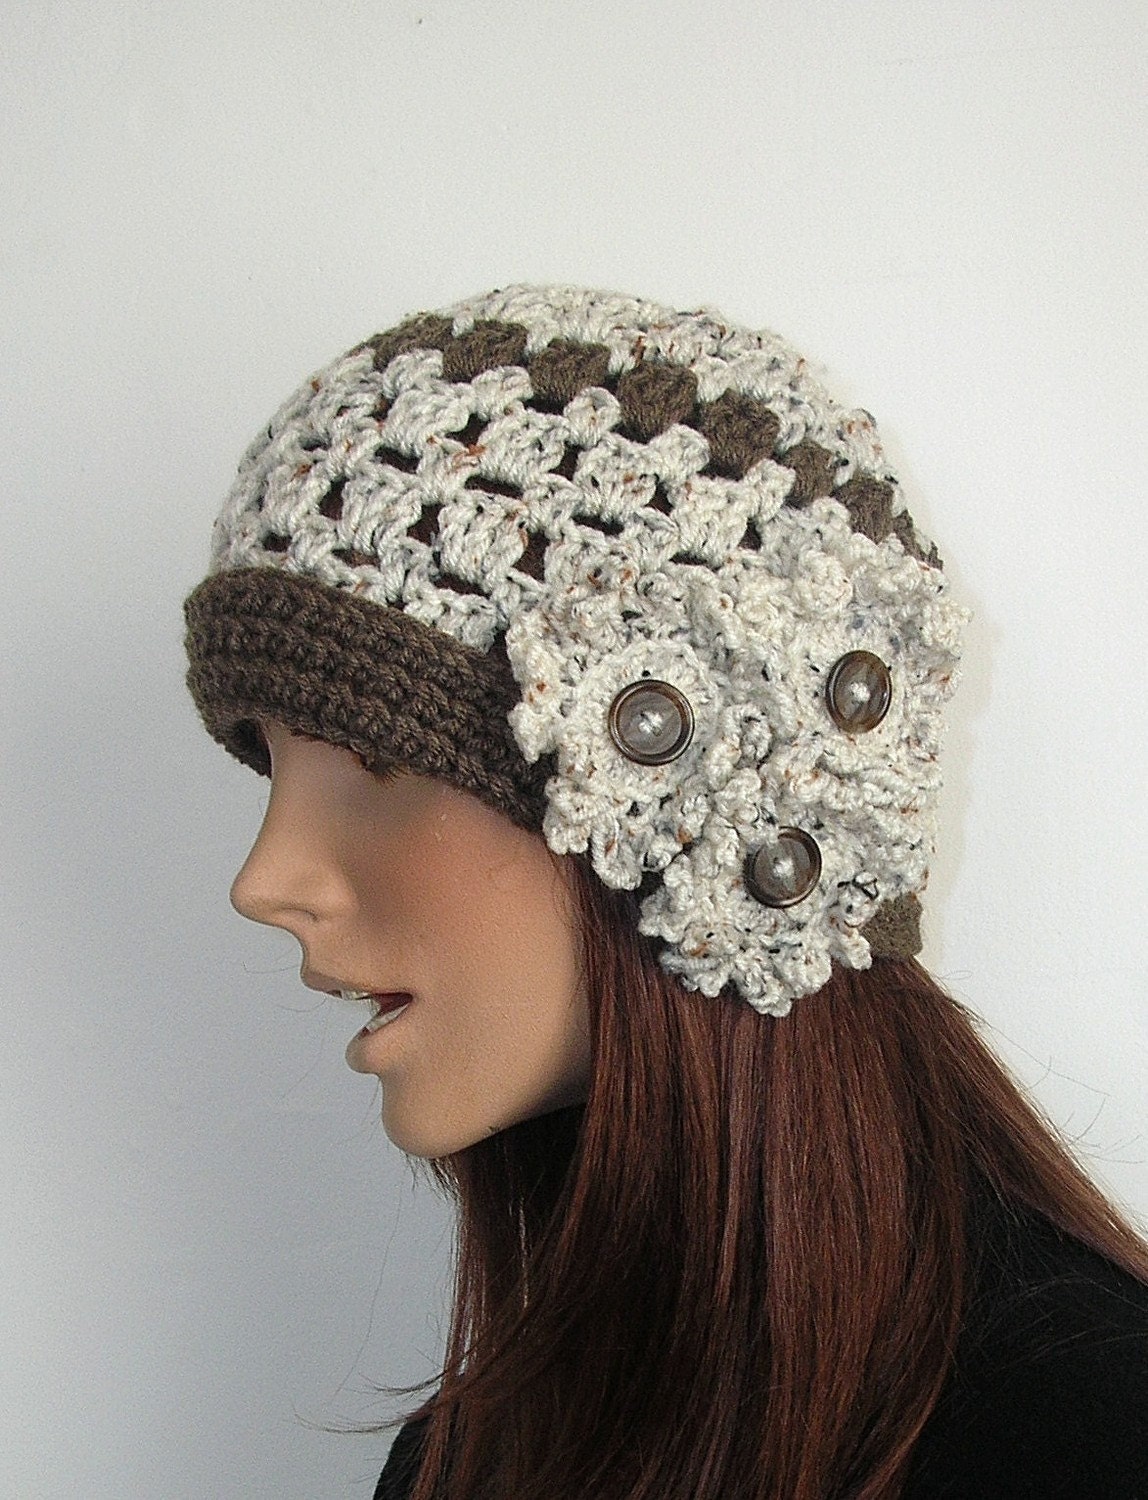 FLAPPER HAT - RAVELRY - A KNIT AND CROCHET COMMUNITY